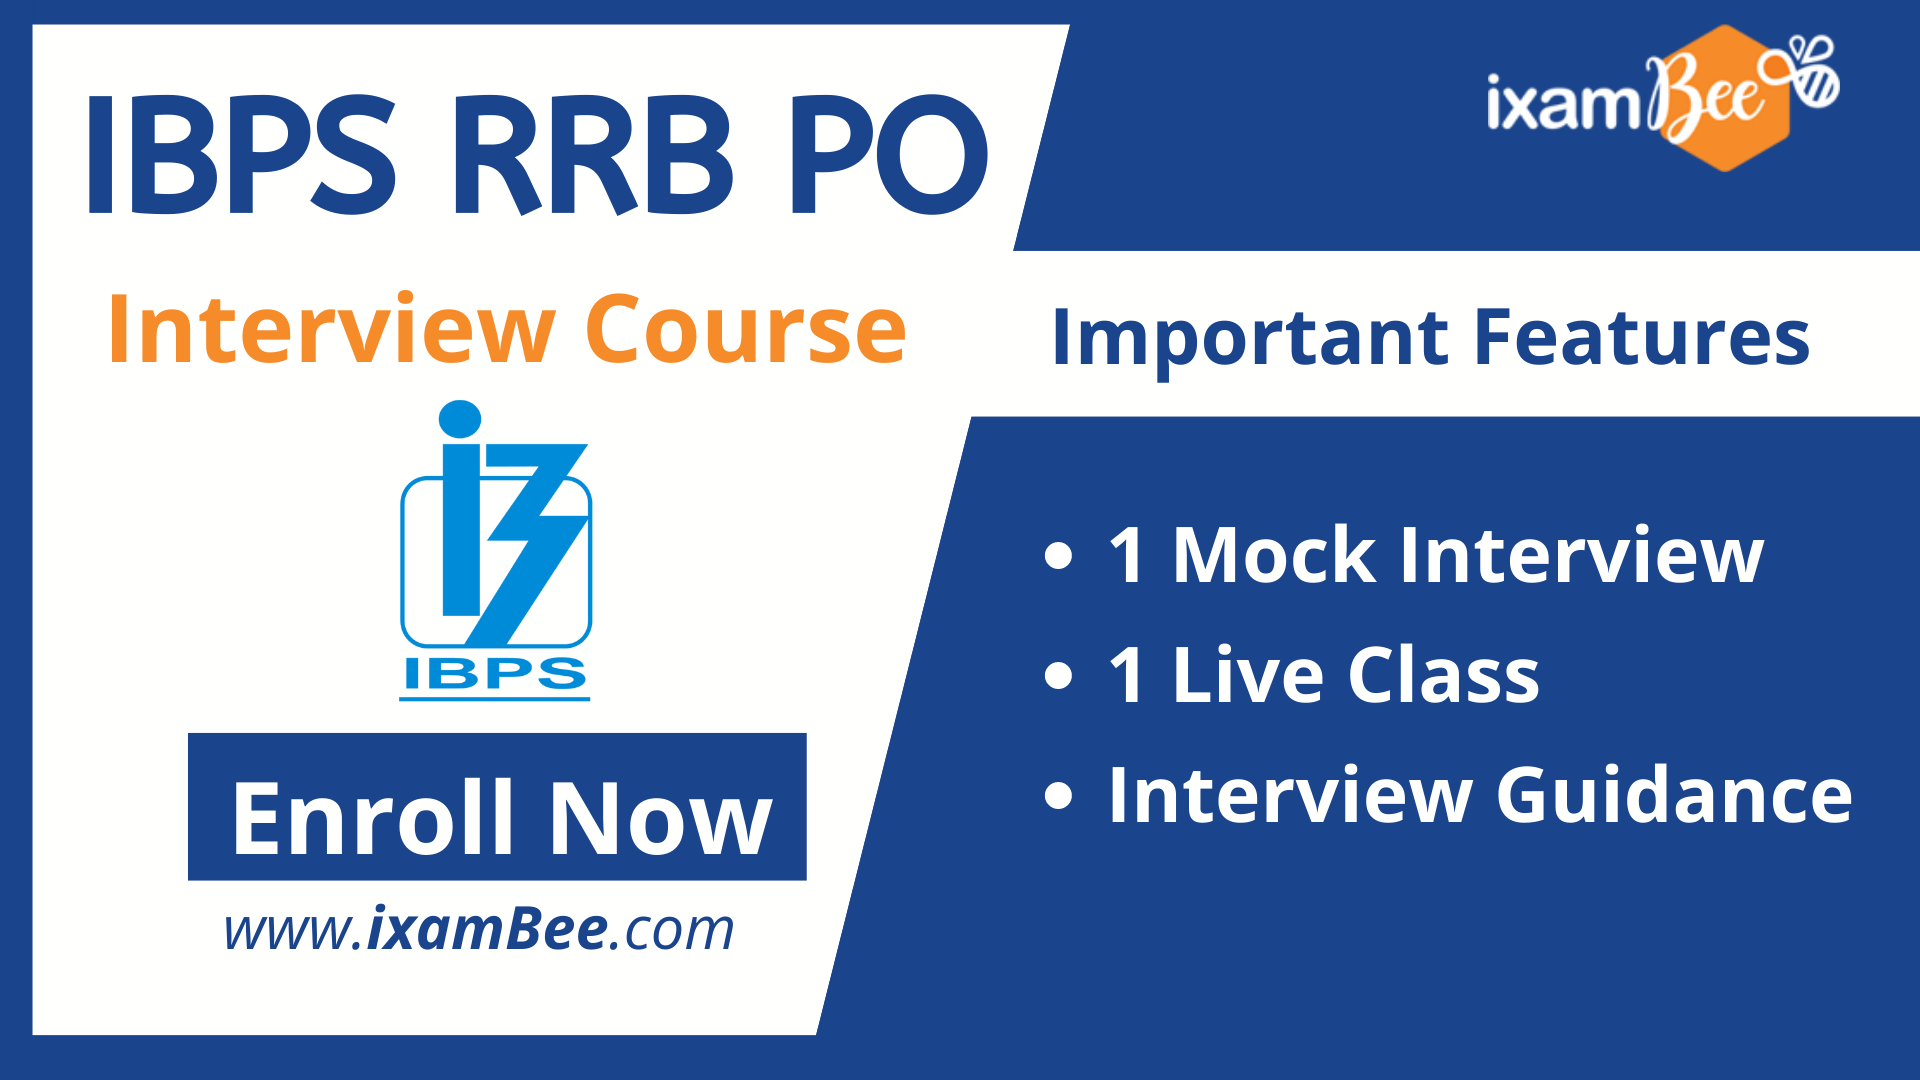 IBPS RRB PO Interview Guidance